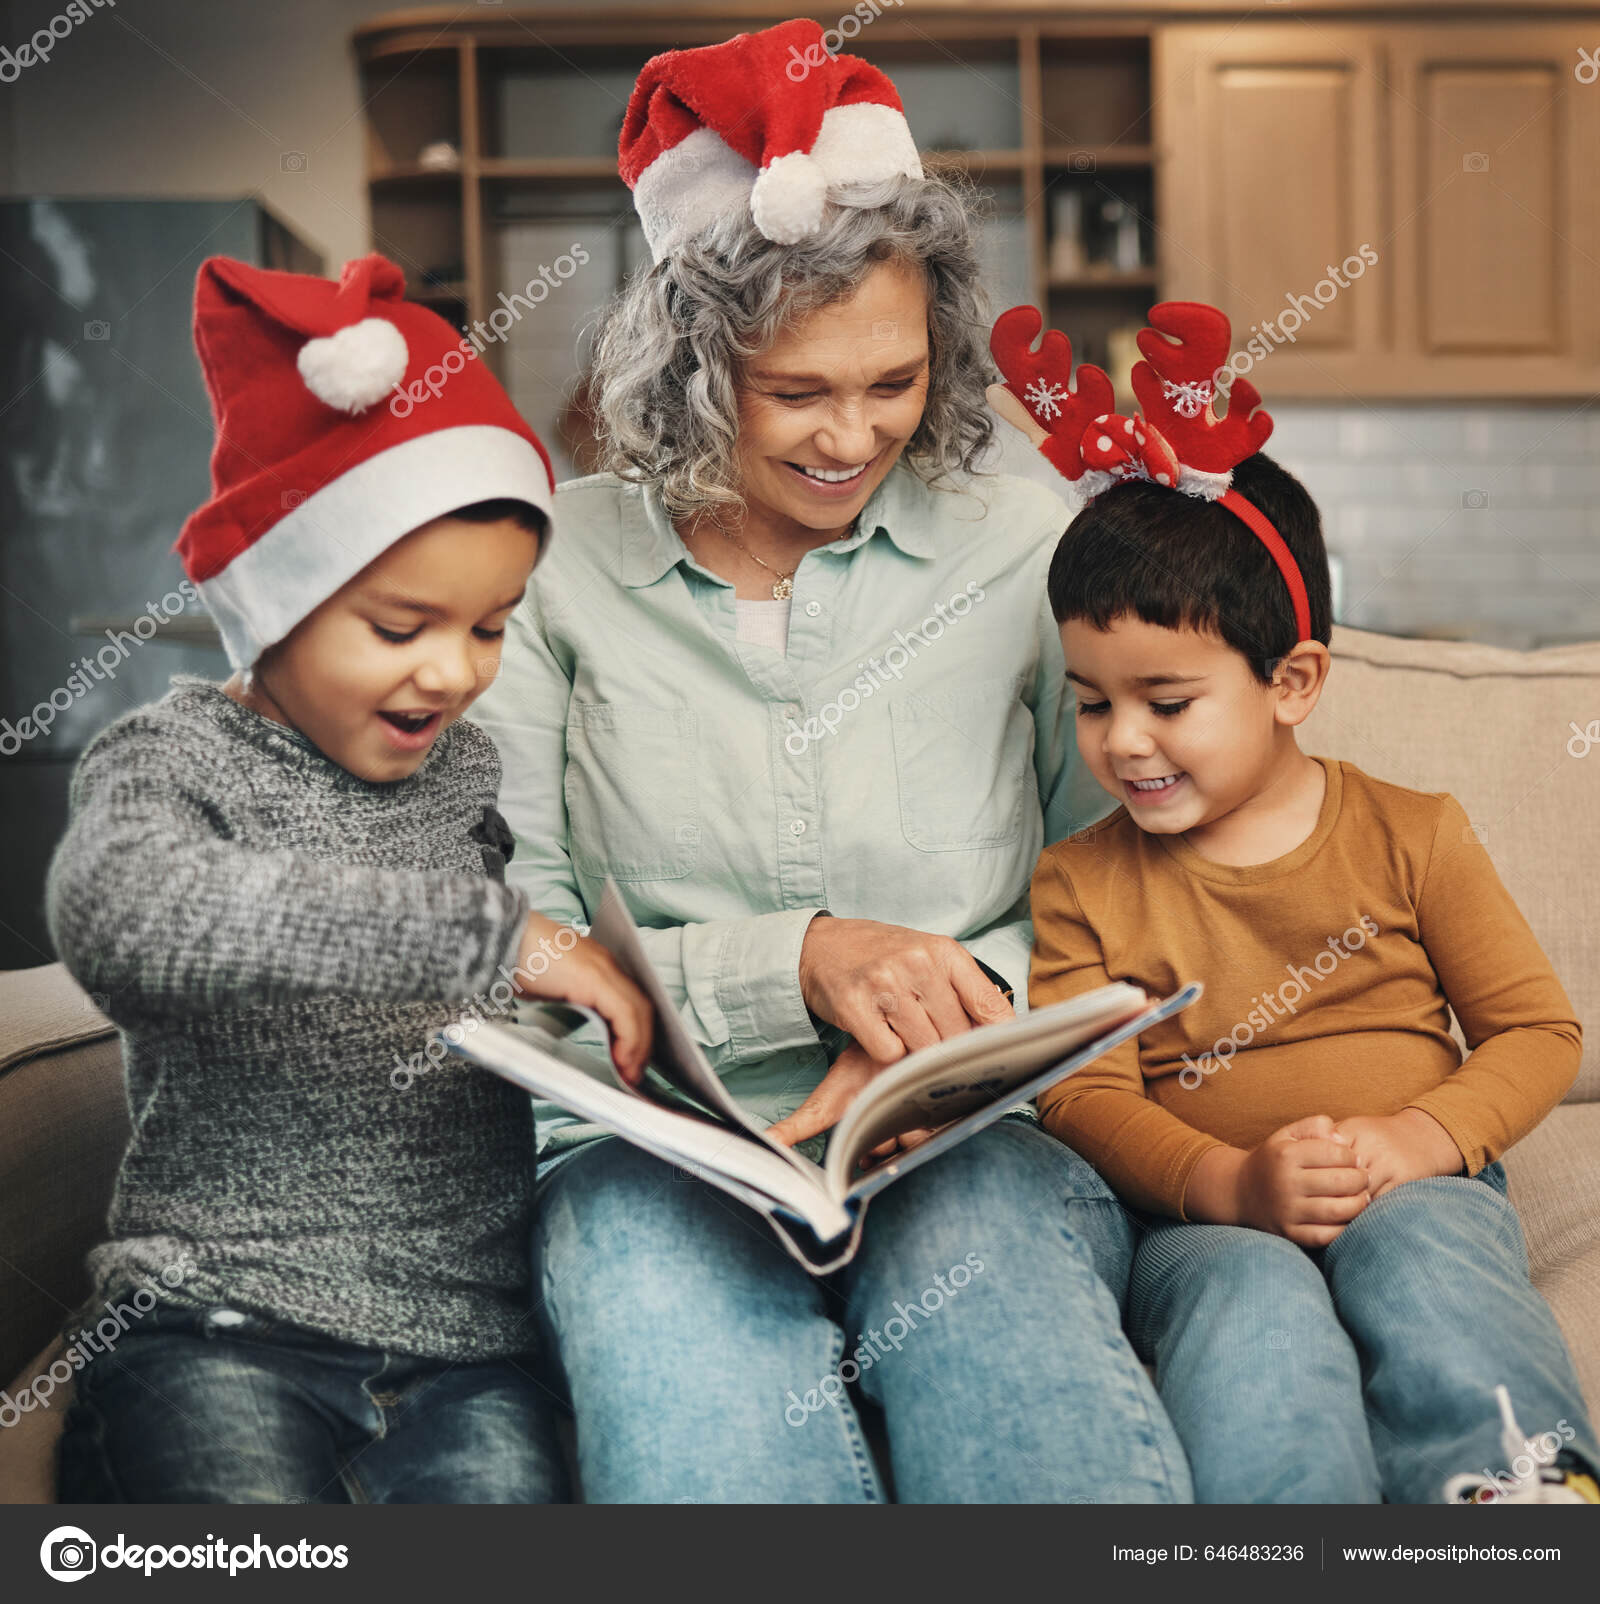 Christmas, photo album or kids with a senior woman and children